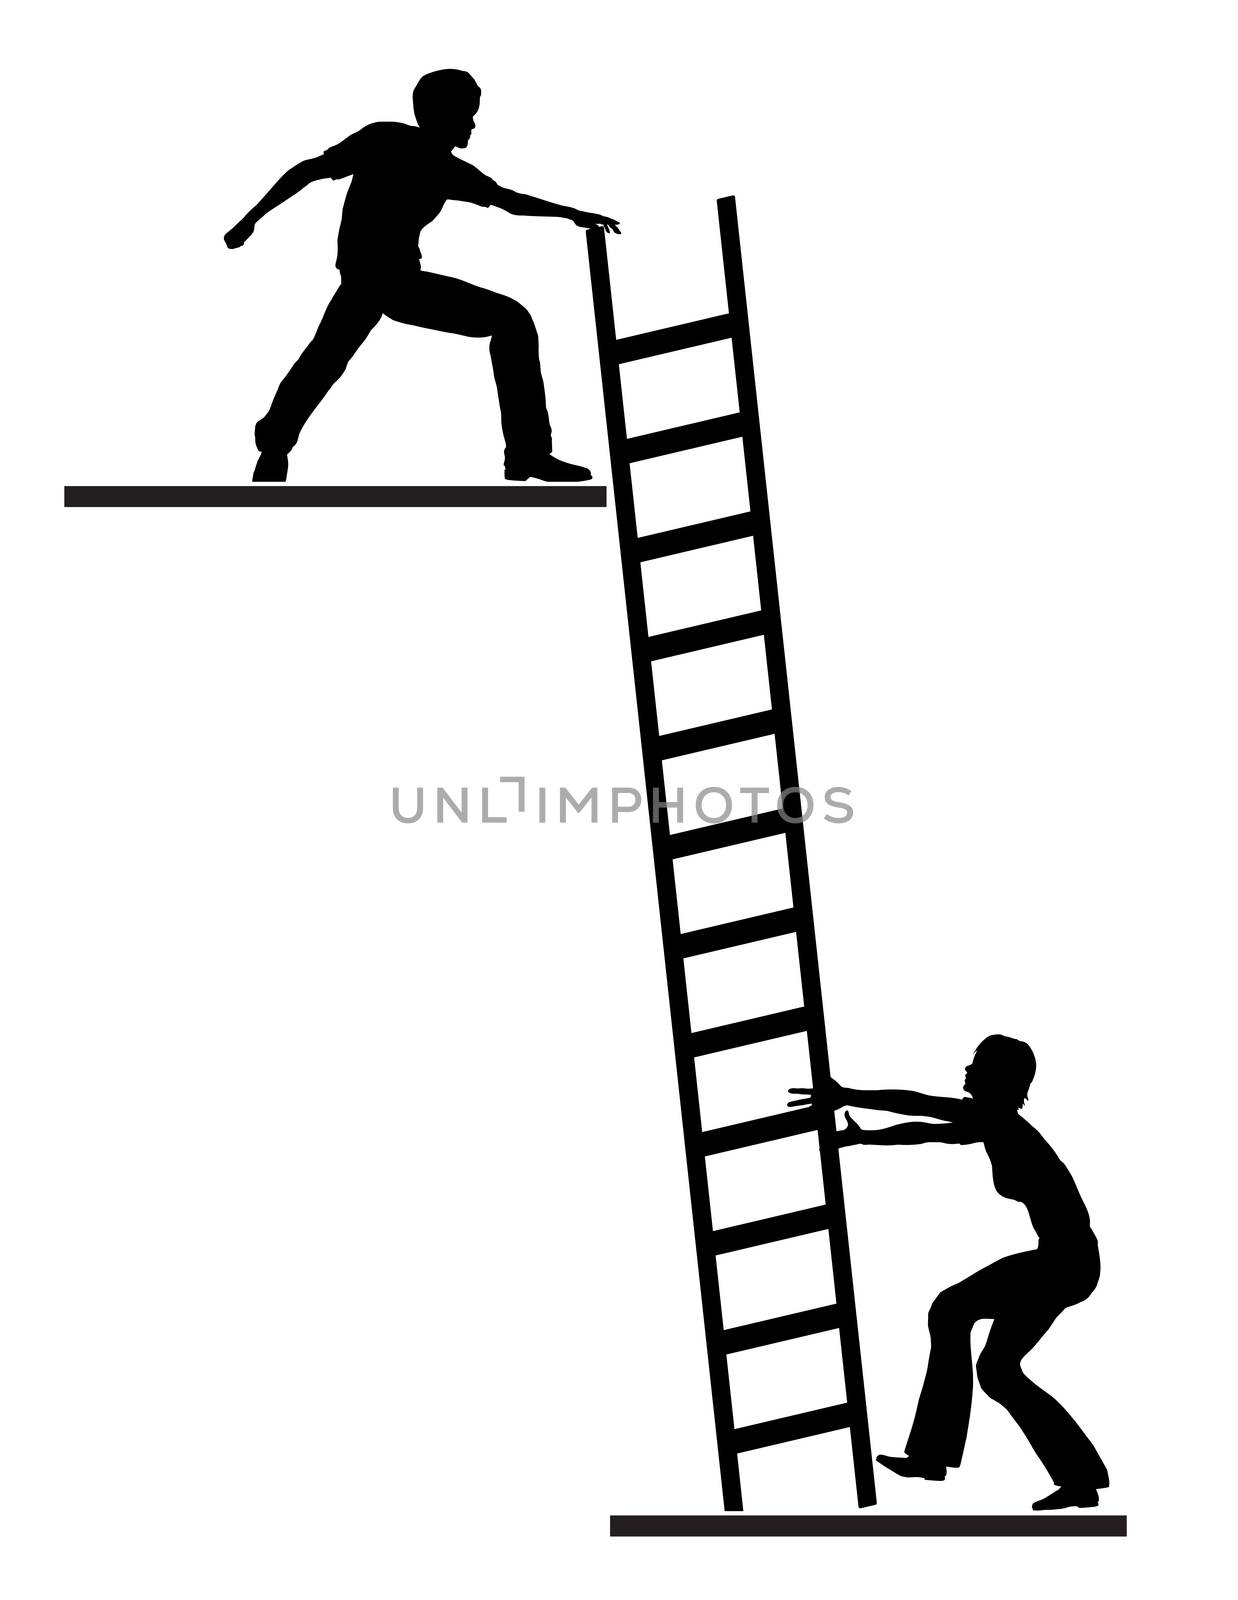 Concept sign of career or life coach assisting person to climb the ladder of success